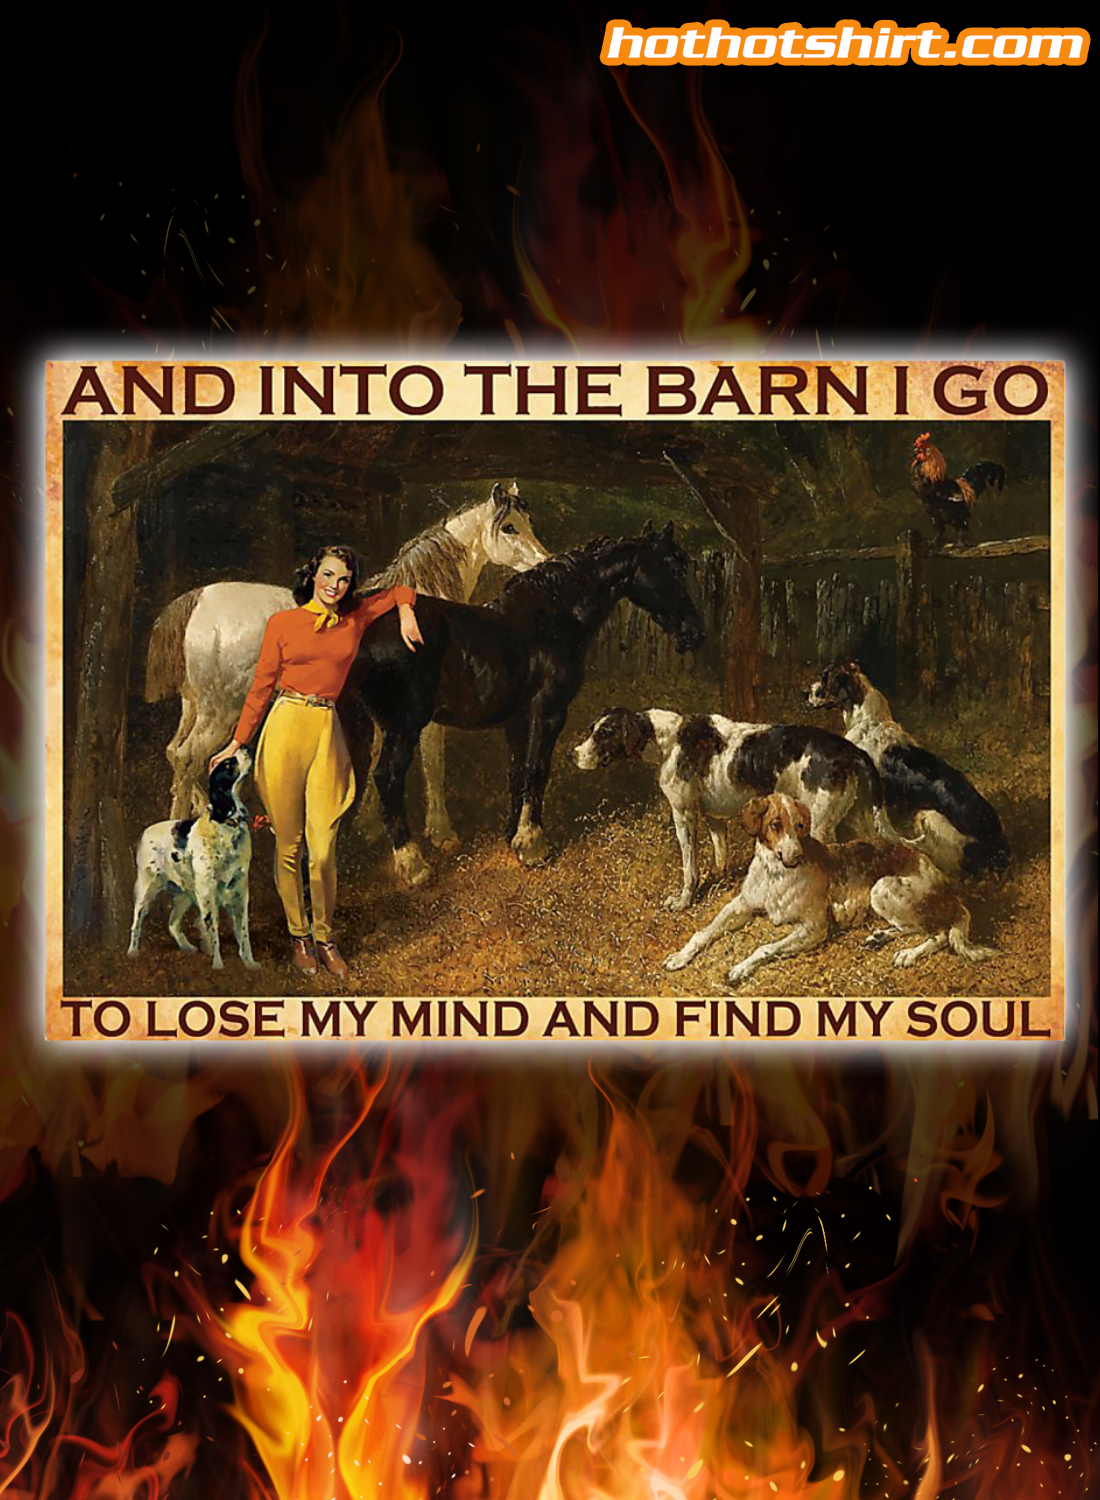 Farmgirl And into the barn i go to lose my mind and find my soul poster